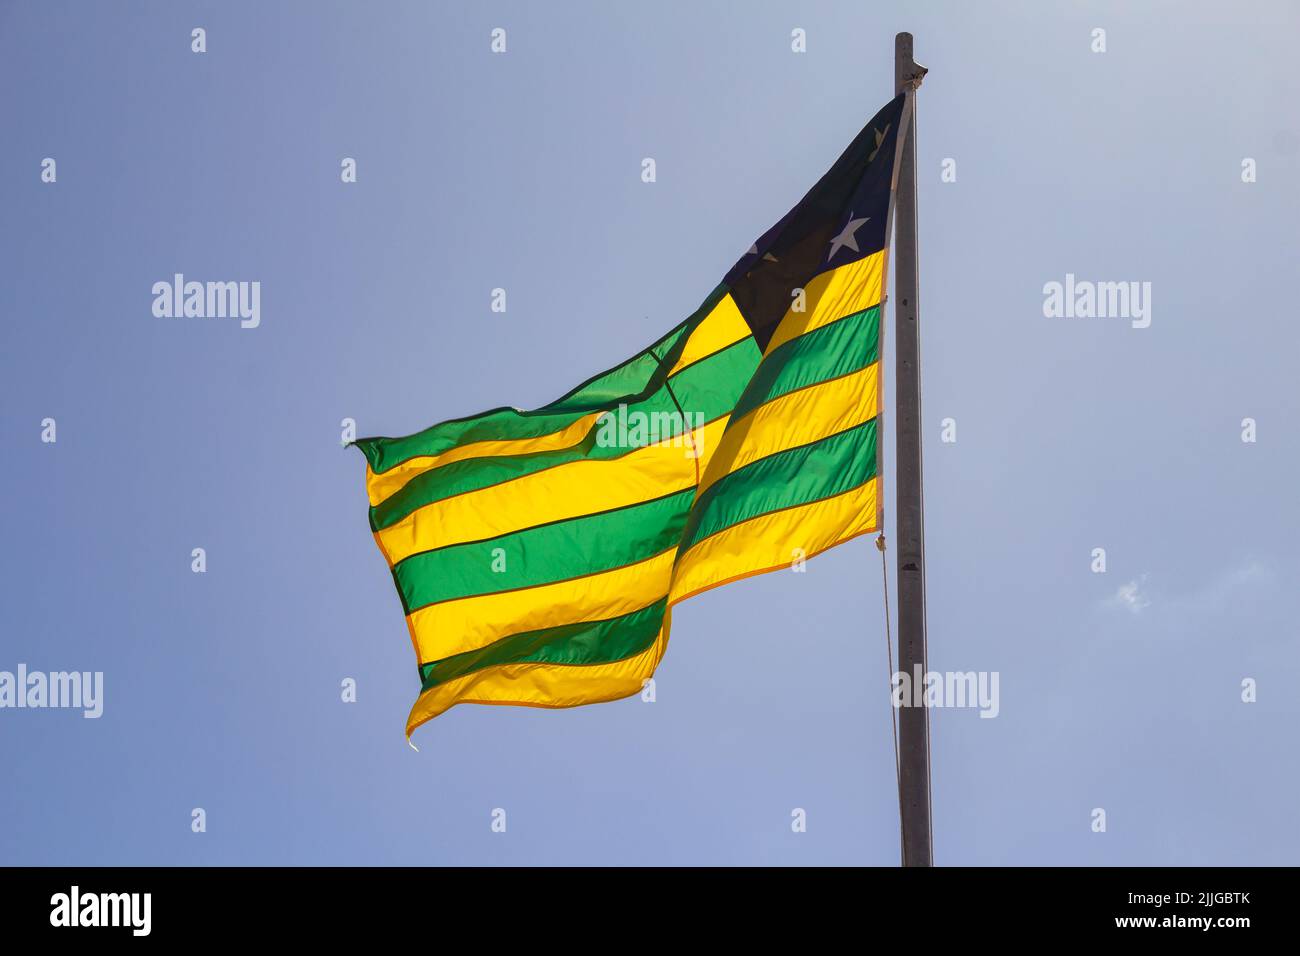 Brasília, Federal District, Brazil – July 23, 2022:  Goias state flag flying and fluttering in the wind with blue sky in the background. Stock Photo